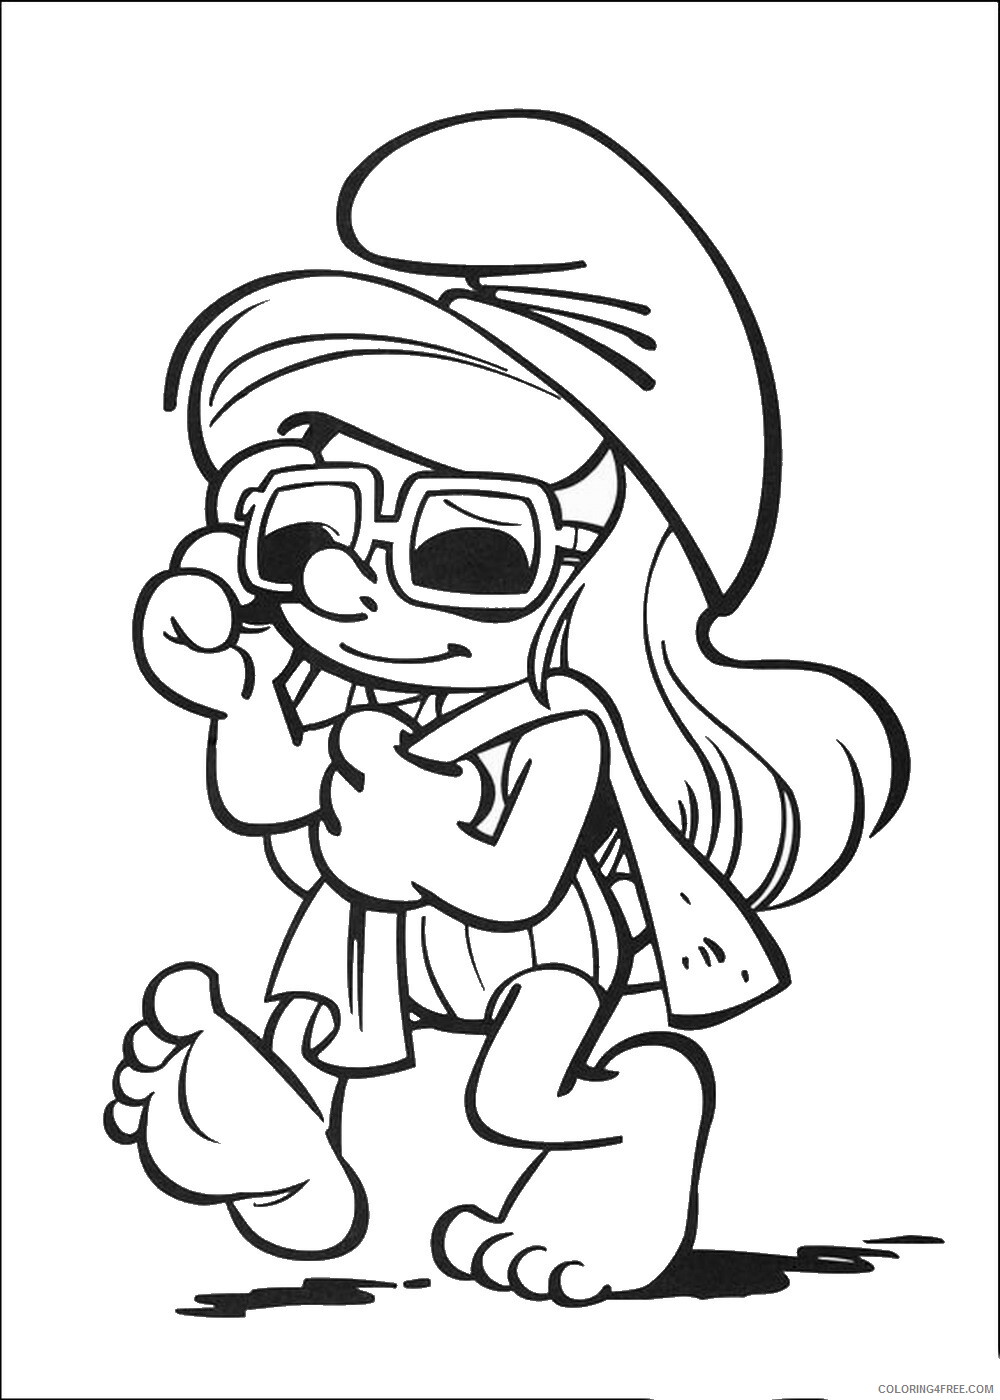 The Smurfs Coloring Pages TV Film smurfs_22 Printable 2020 09723 Coloring4free